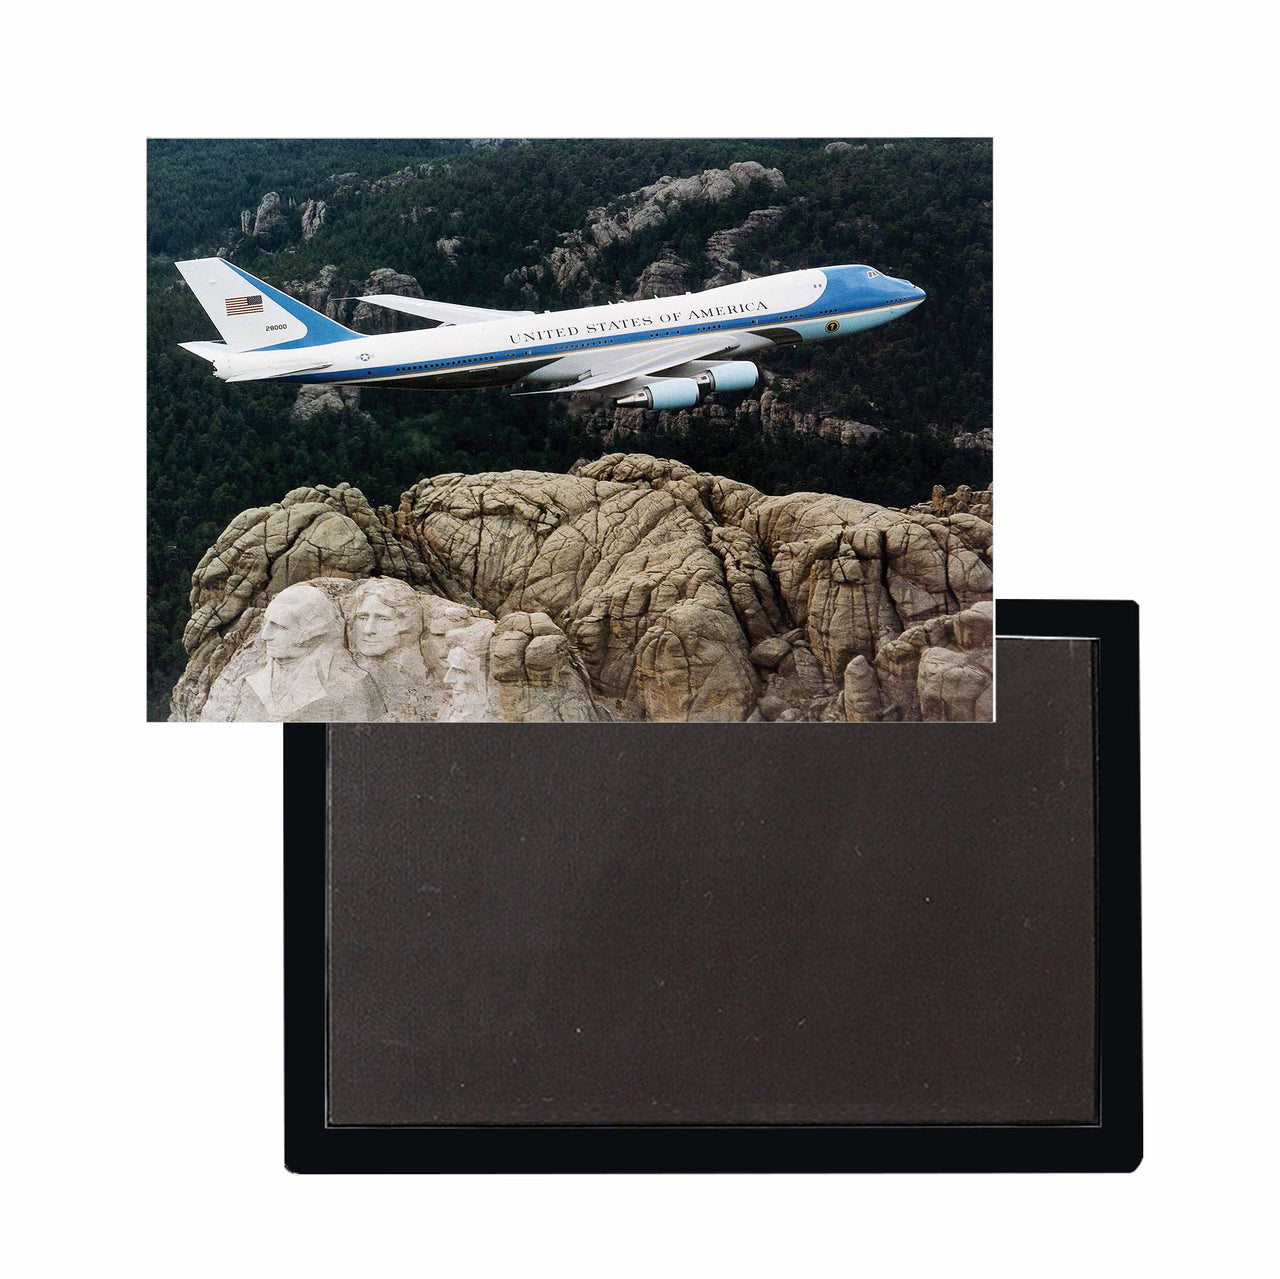 Cruising United States of America Boeing 747 Printed Pillows Designed Magnets